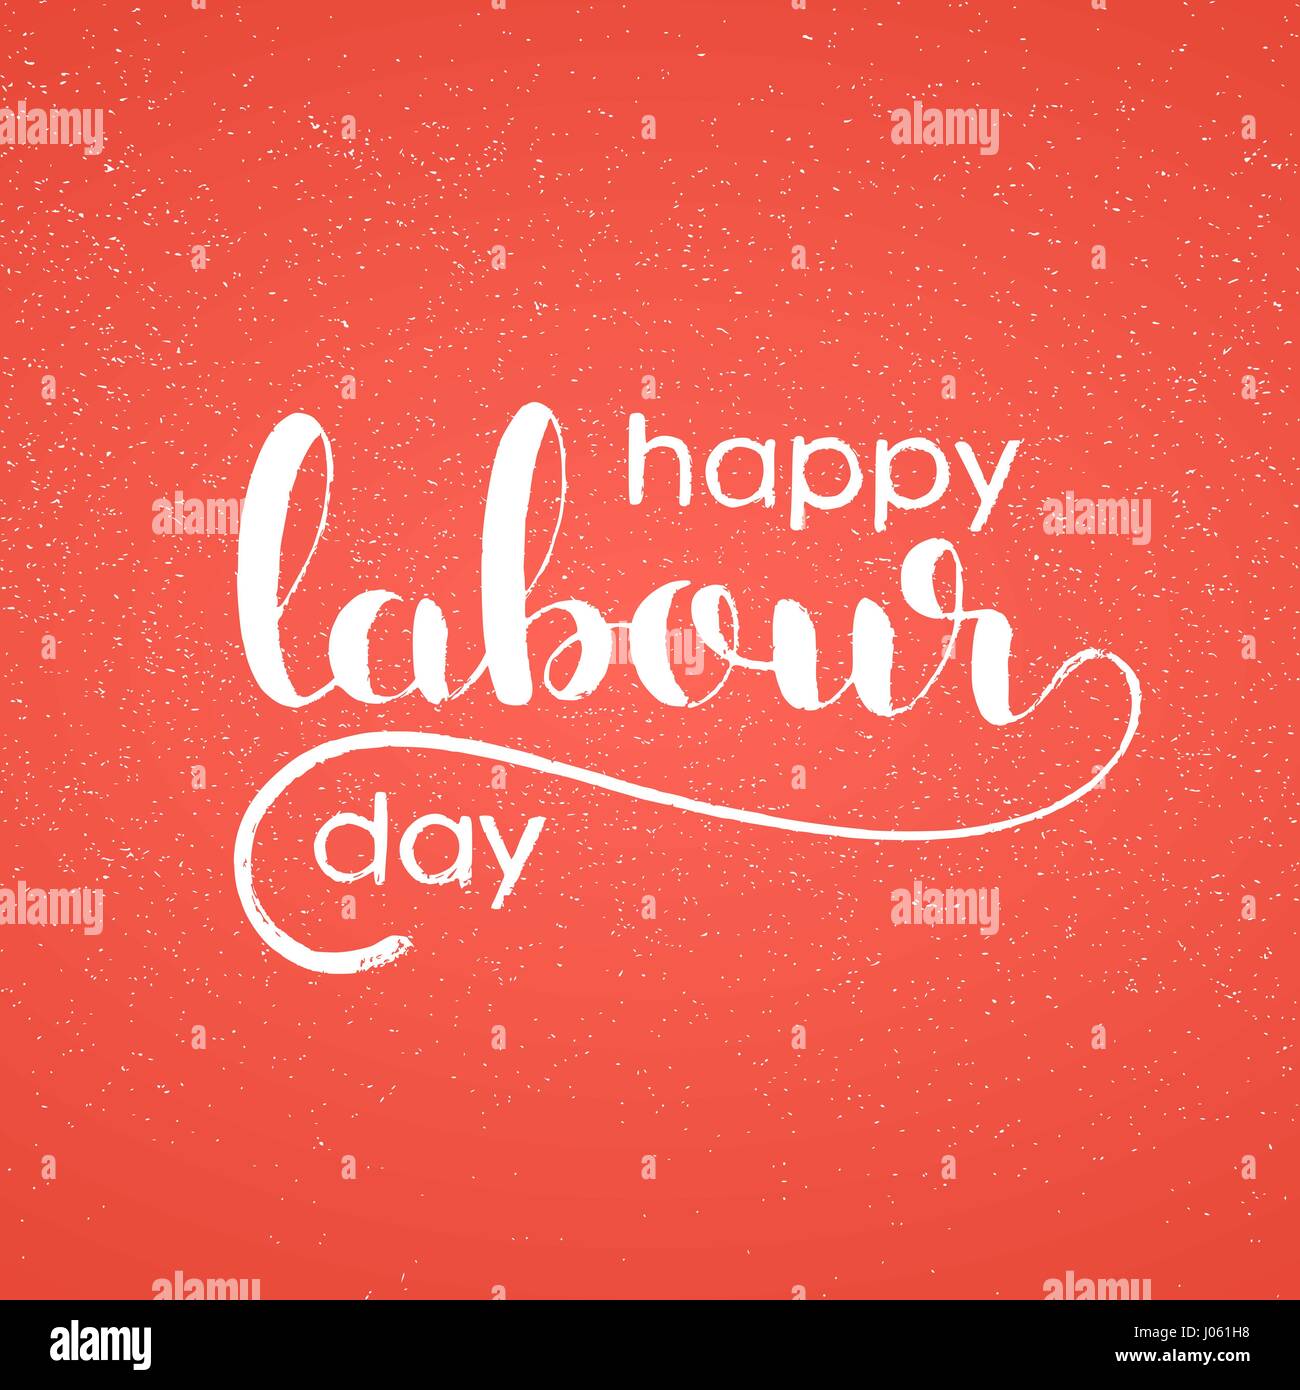 Happy Labour day handwritten lettering. Modern vector hand drawn calligraphy with grunge overlay texture over red background Stock Vector